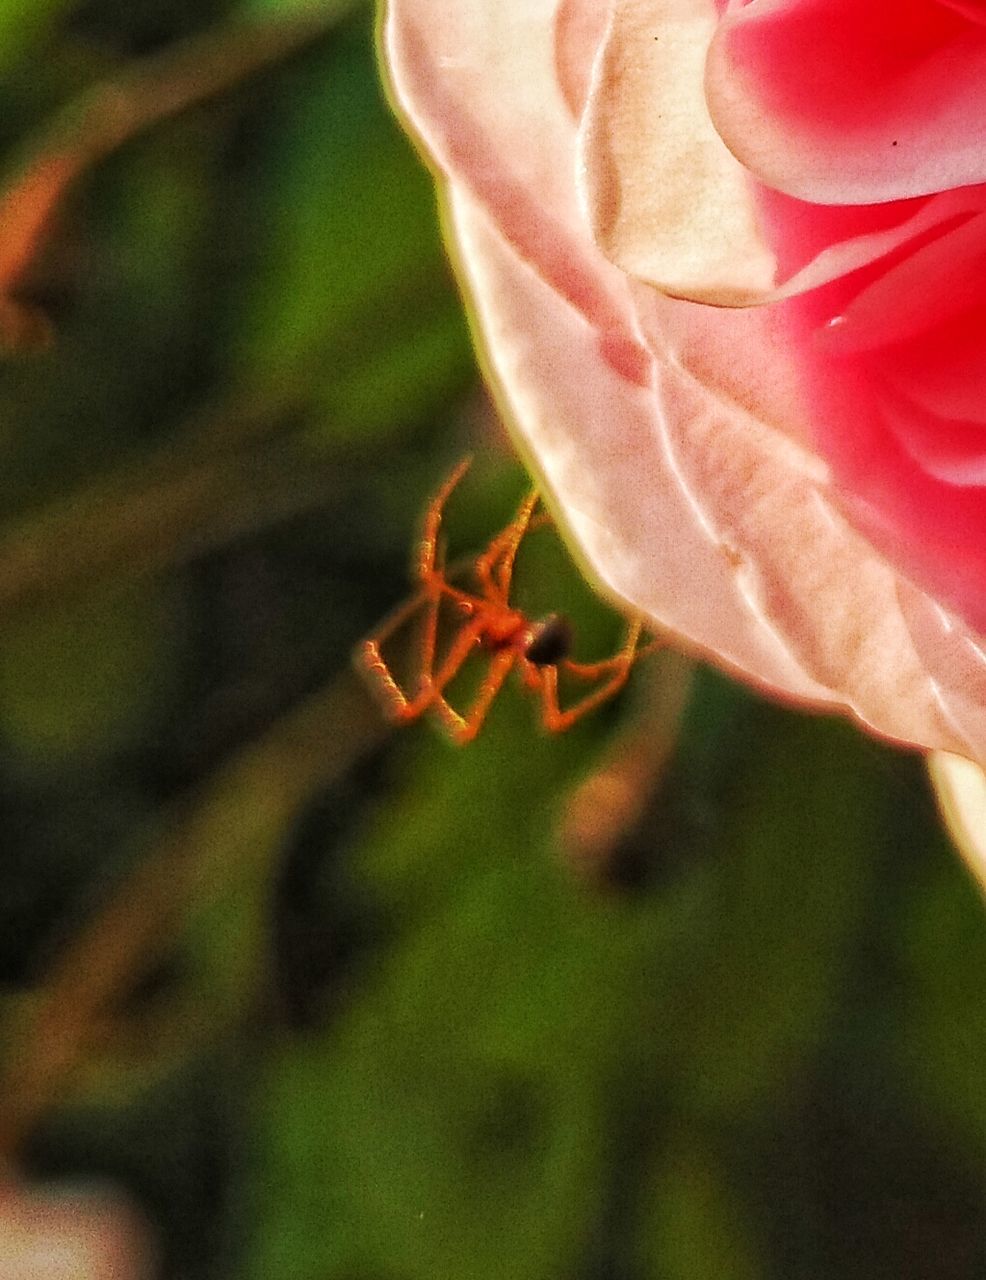 CLOSE-UP OF RED ROSE BLOOMING OUTDOORS